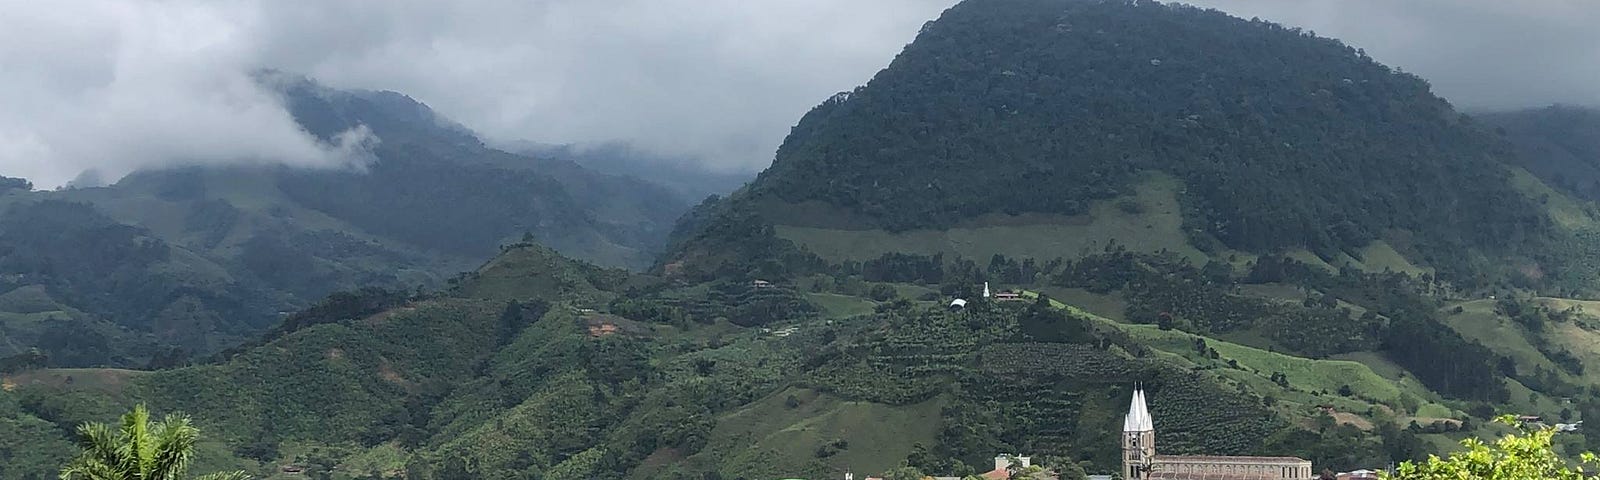 View of a town in Colombia nestled into the green Andes mountains